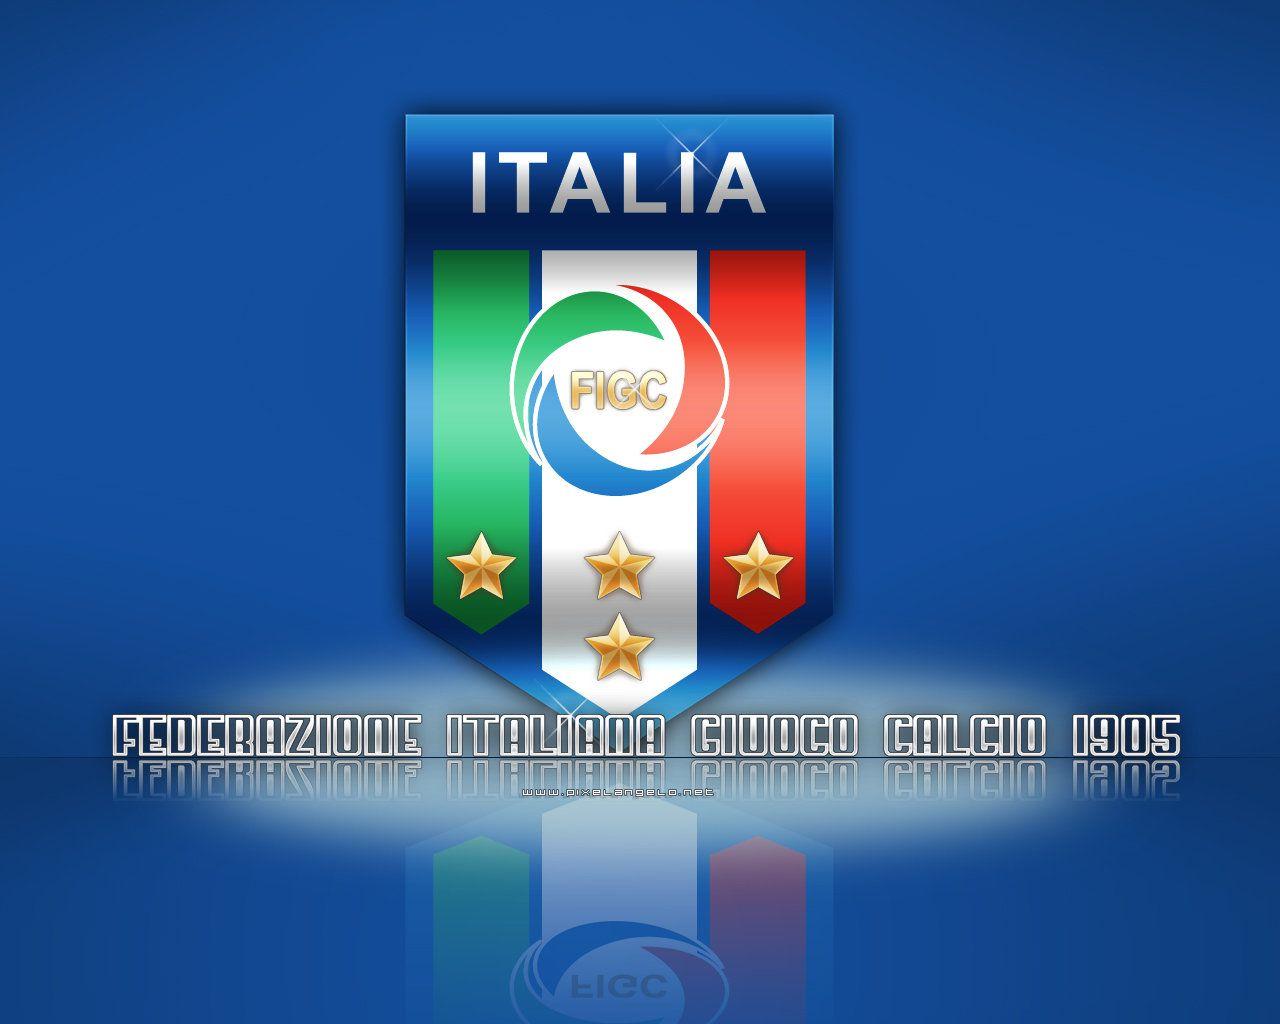 Italy National Football Team Wallpaper, High Definition Italy